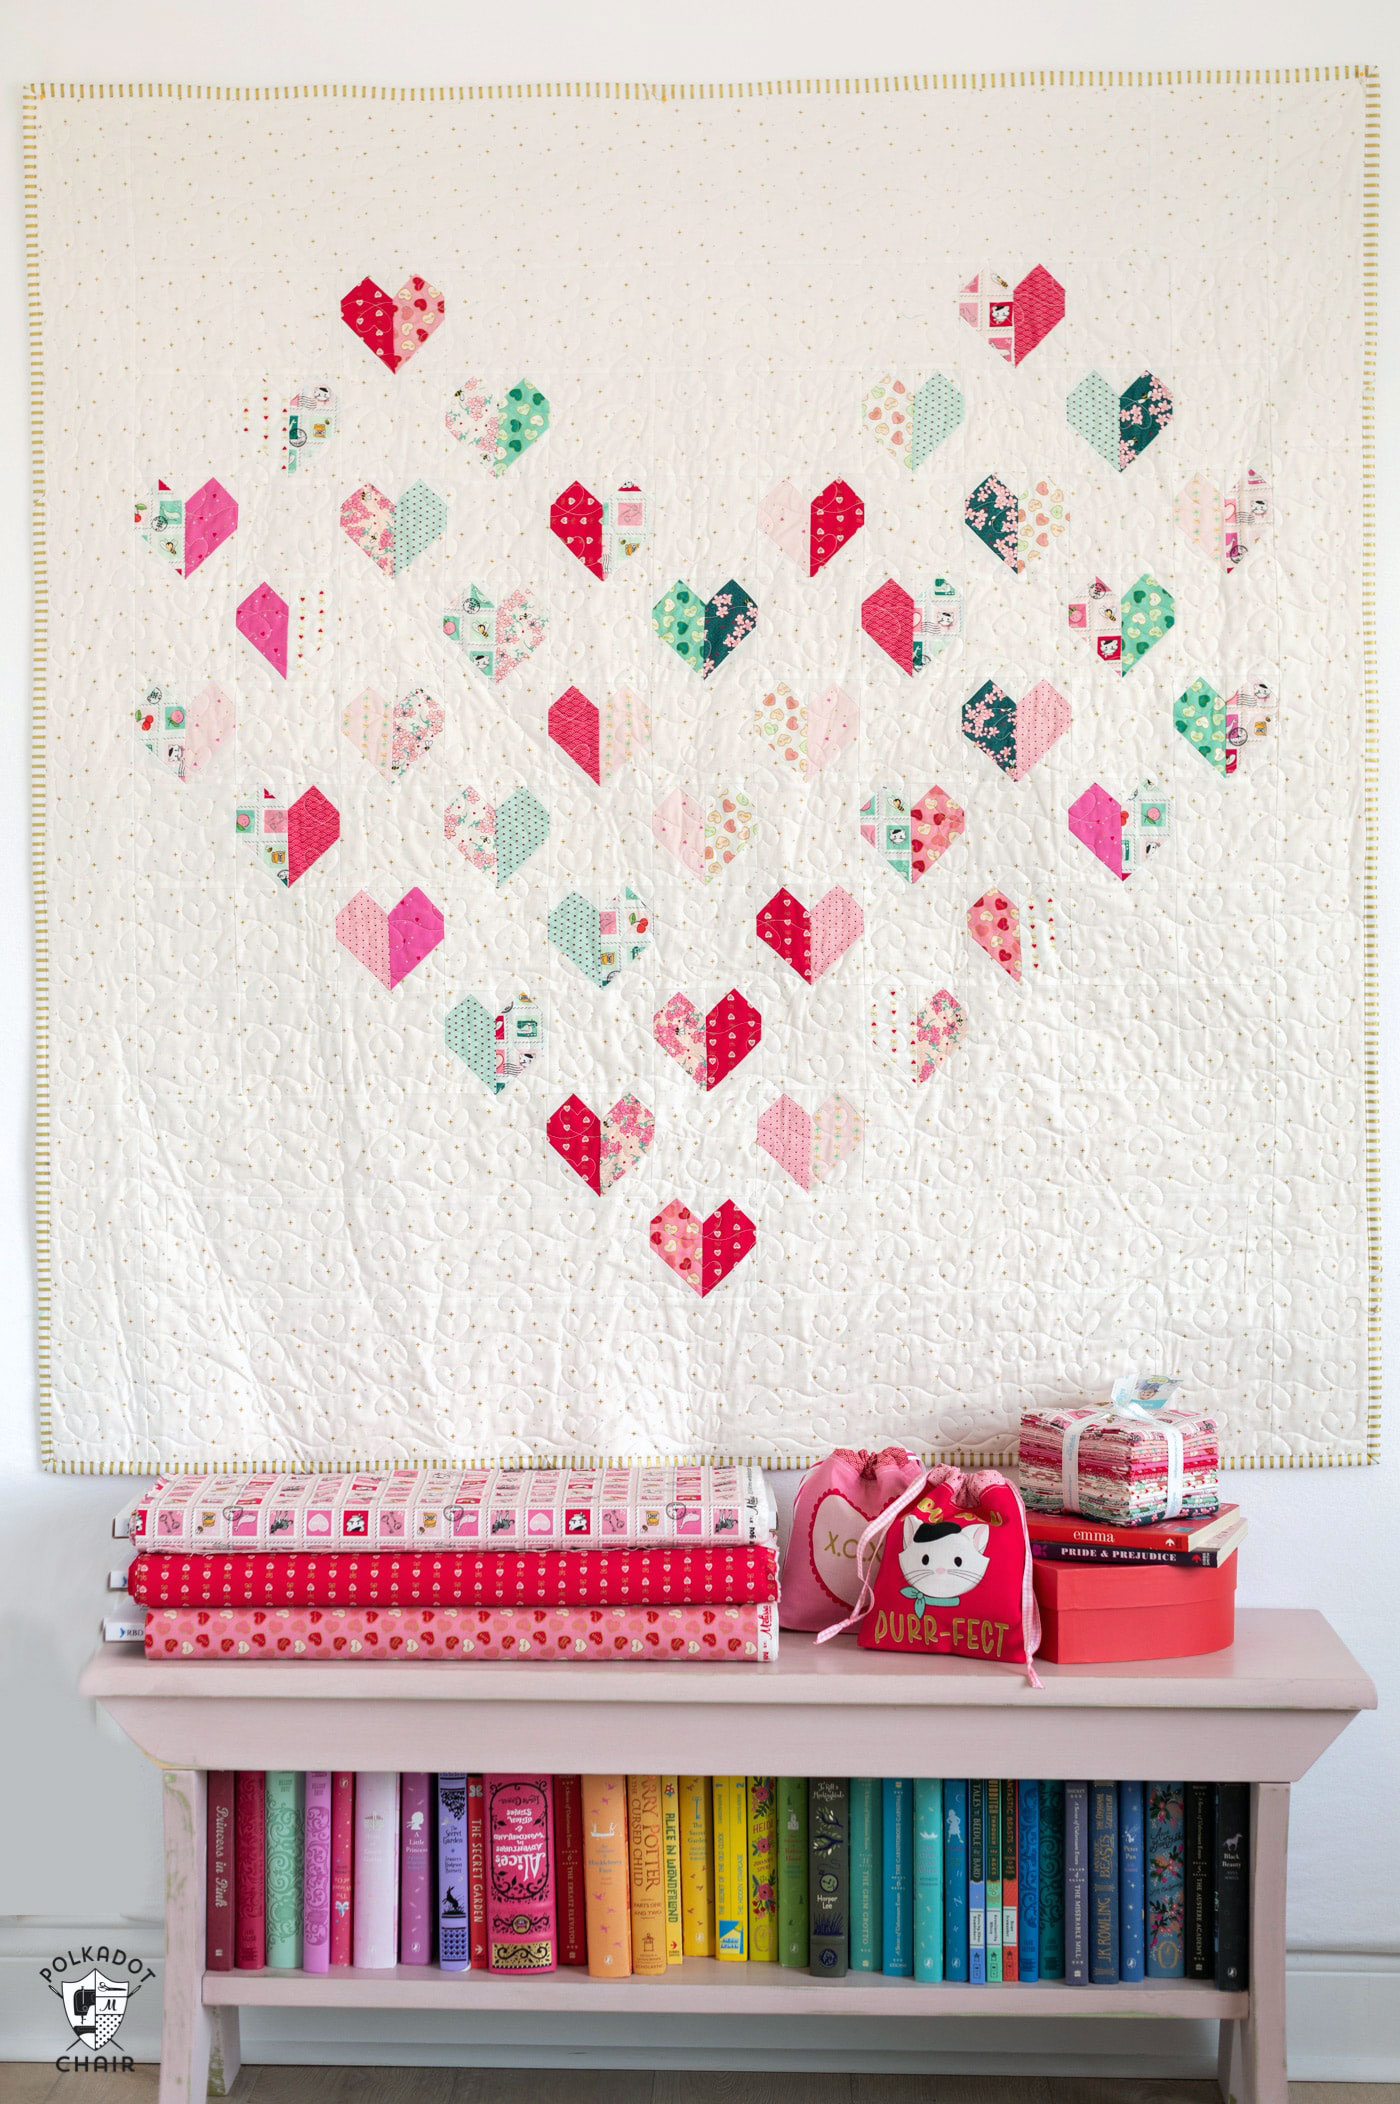 heart quilt hanging on wall with bench featuring colorful books